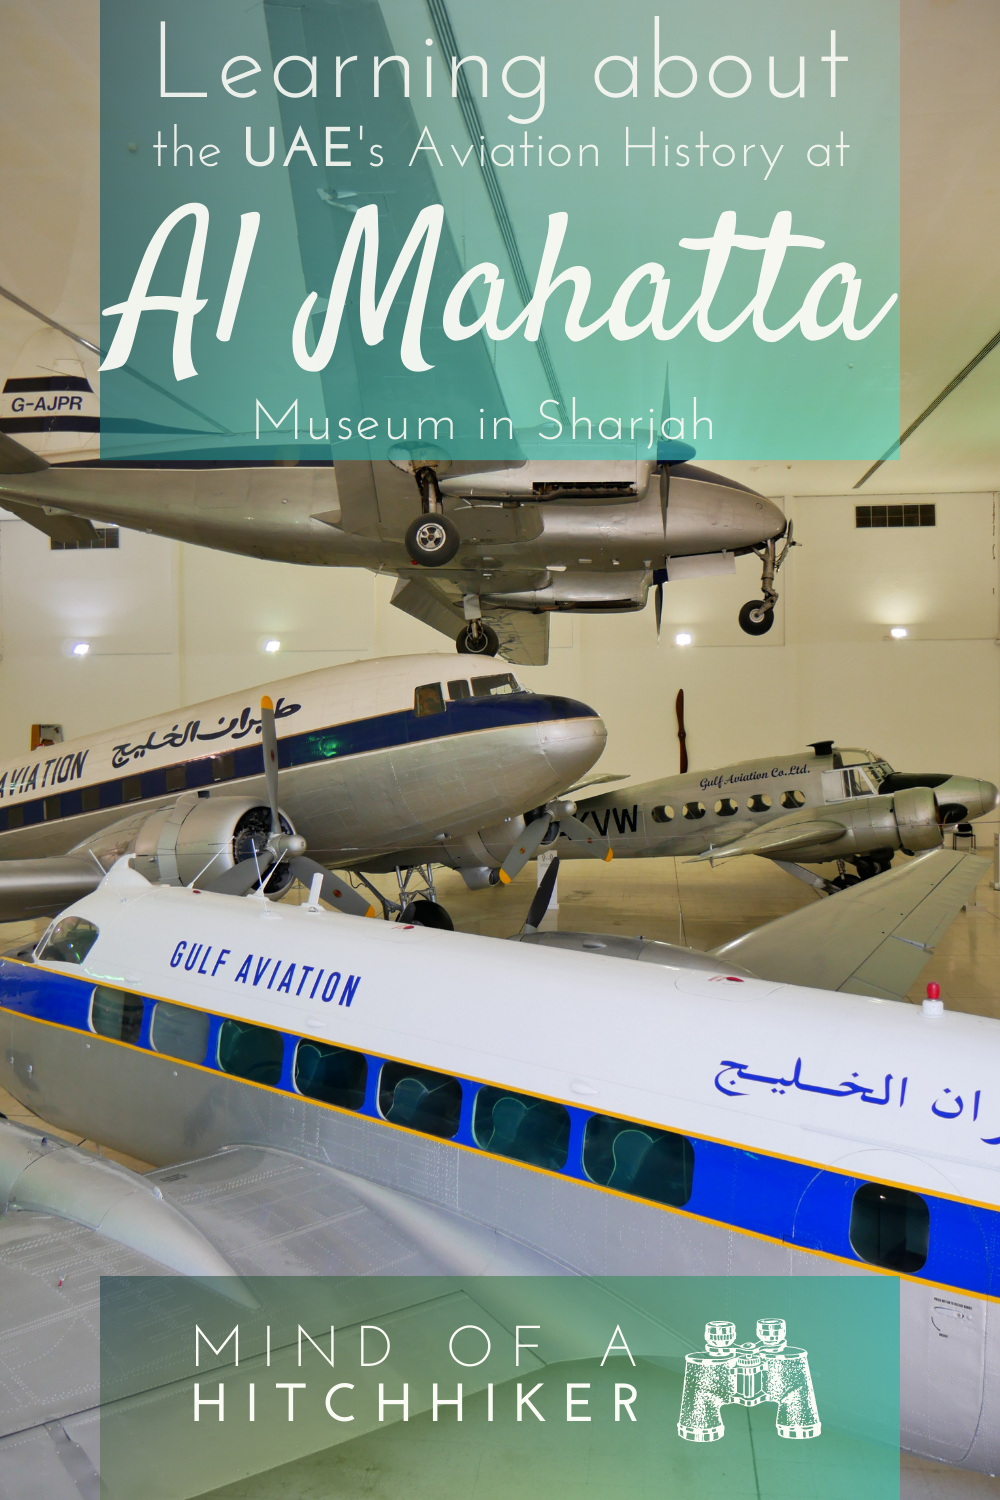 In the middle of Sharjah City is an avenue that used to be the runway of the very first airport of the UAE. Yes, it's older than the airports in Dubai and Abu Dhabi! You can visit this nice museum called Al Mahatta where you can learn about the history and look at old planes #AlMahatta #Sharjah #SharjahCity #UAE #UnitedArabEmirates #Gulf #Khaleej #airport #abandonedairport #aircraft #museum #aviation #history #abandonedplaces #Dubai #AbuDhabi #SharjahAirport #airplane #emirate #AirArabia